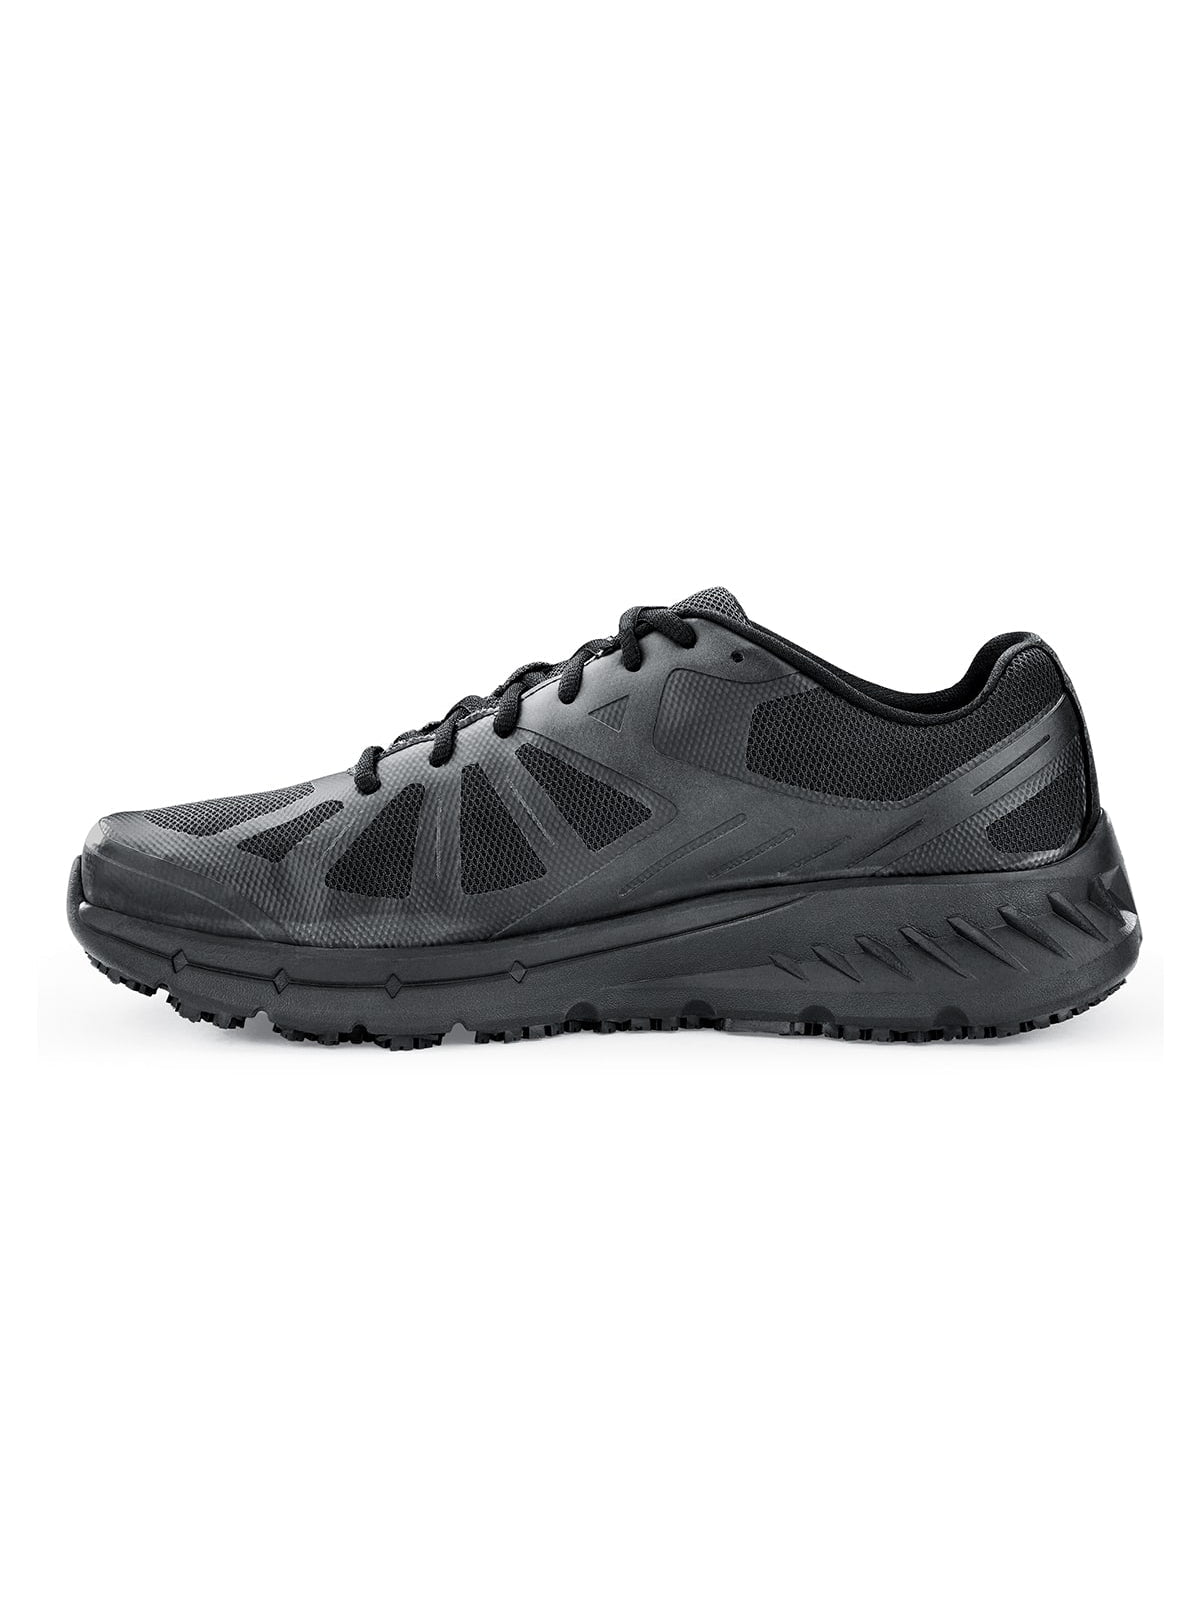 Women's Work Shoe Vitality II Black by  Shoes For Crews.